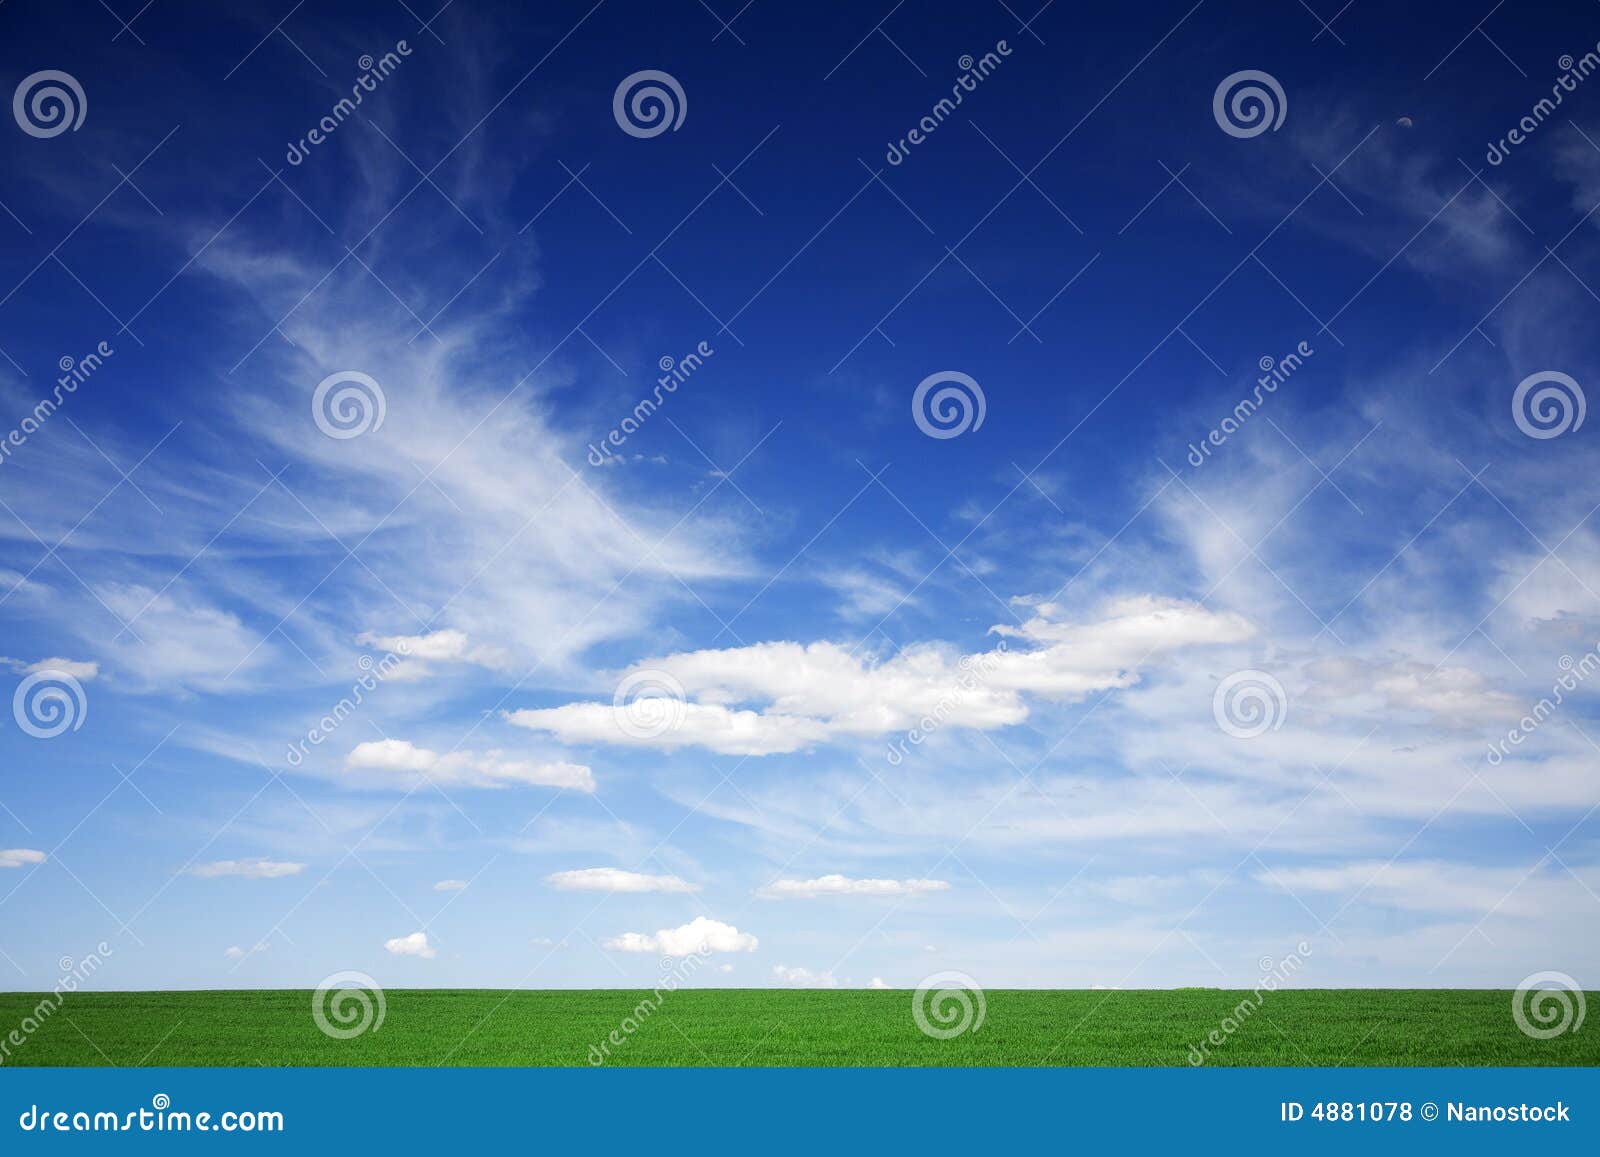 green field, blue skies, white clouds in spring